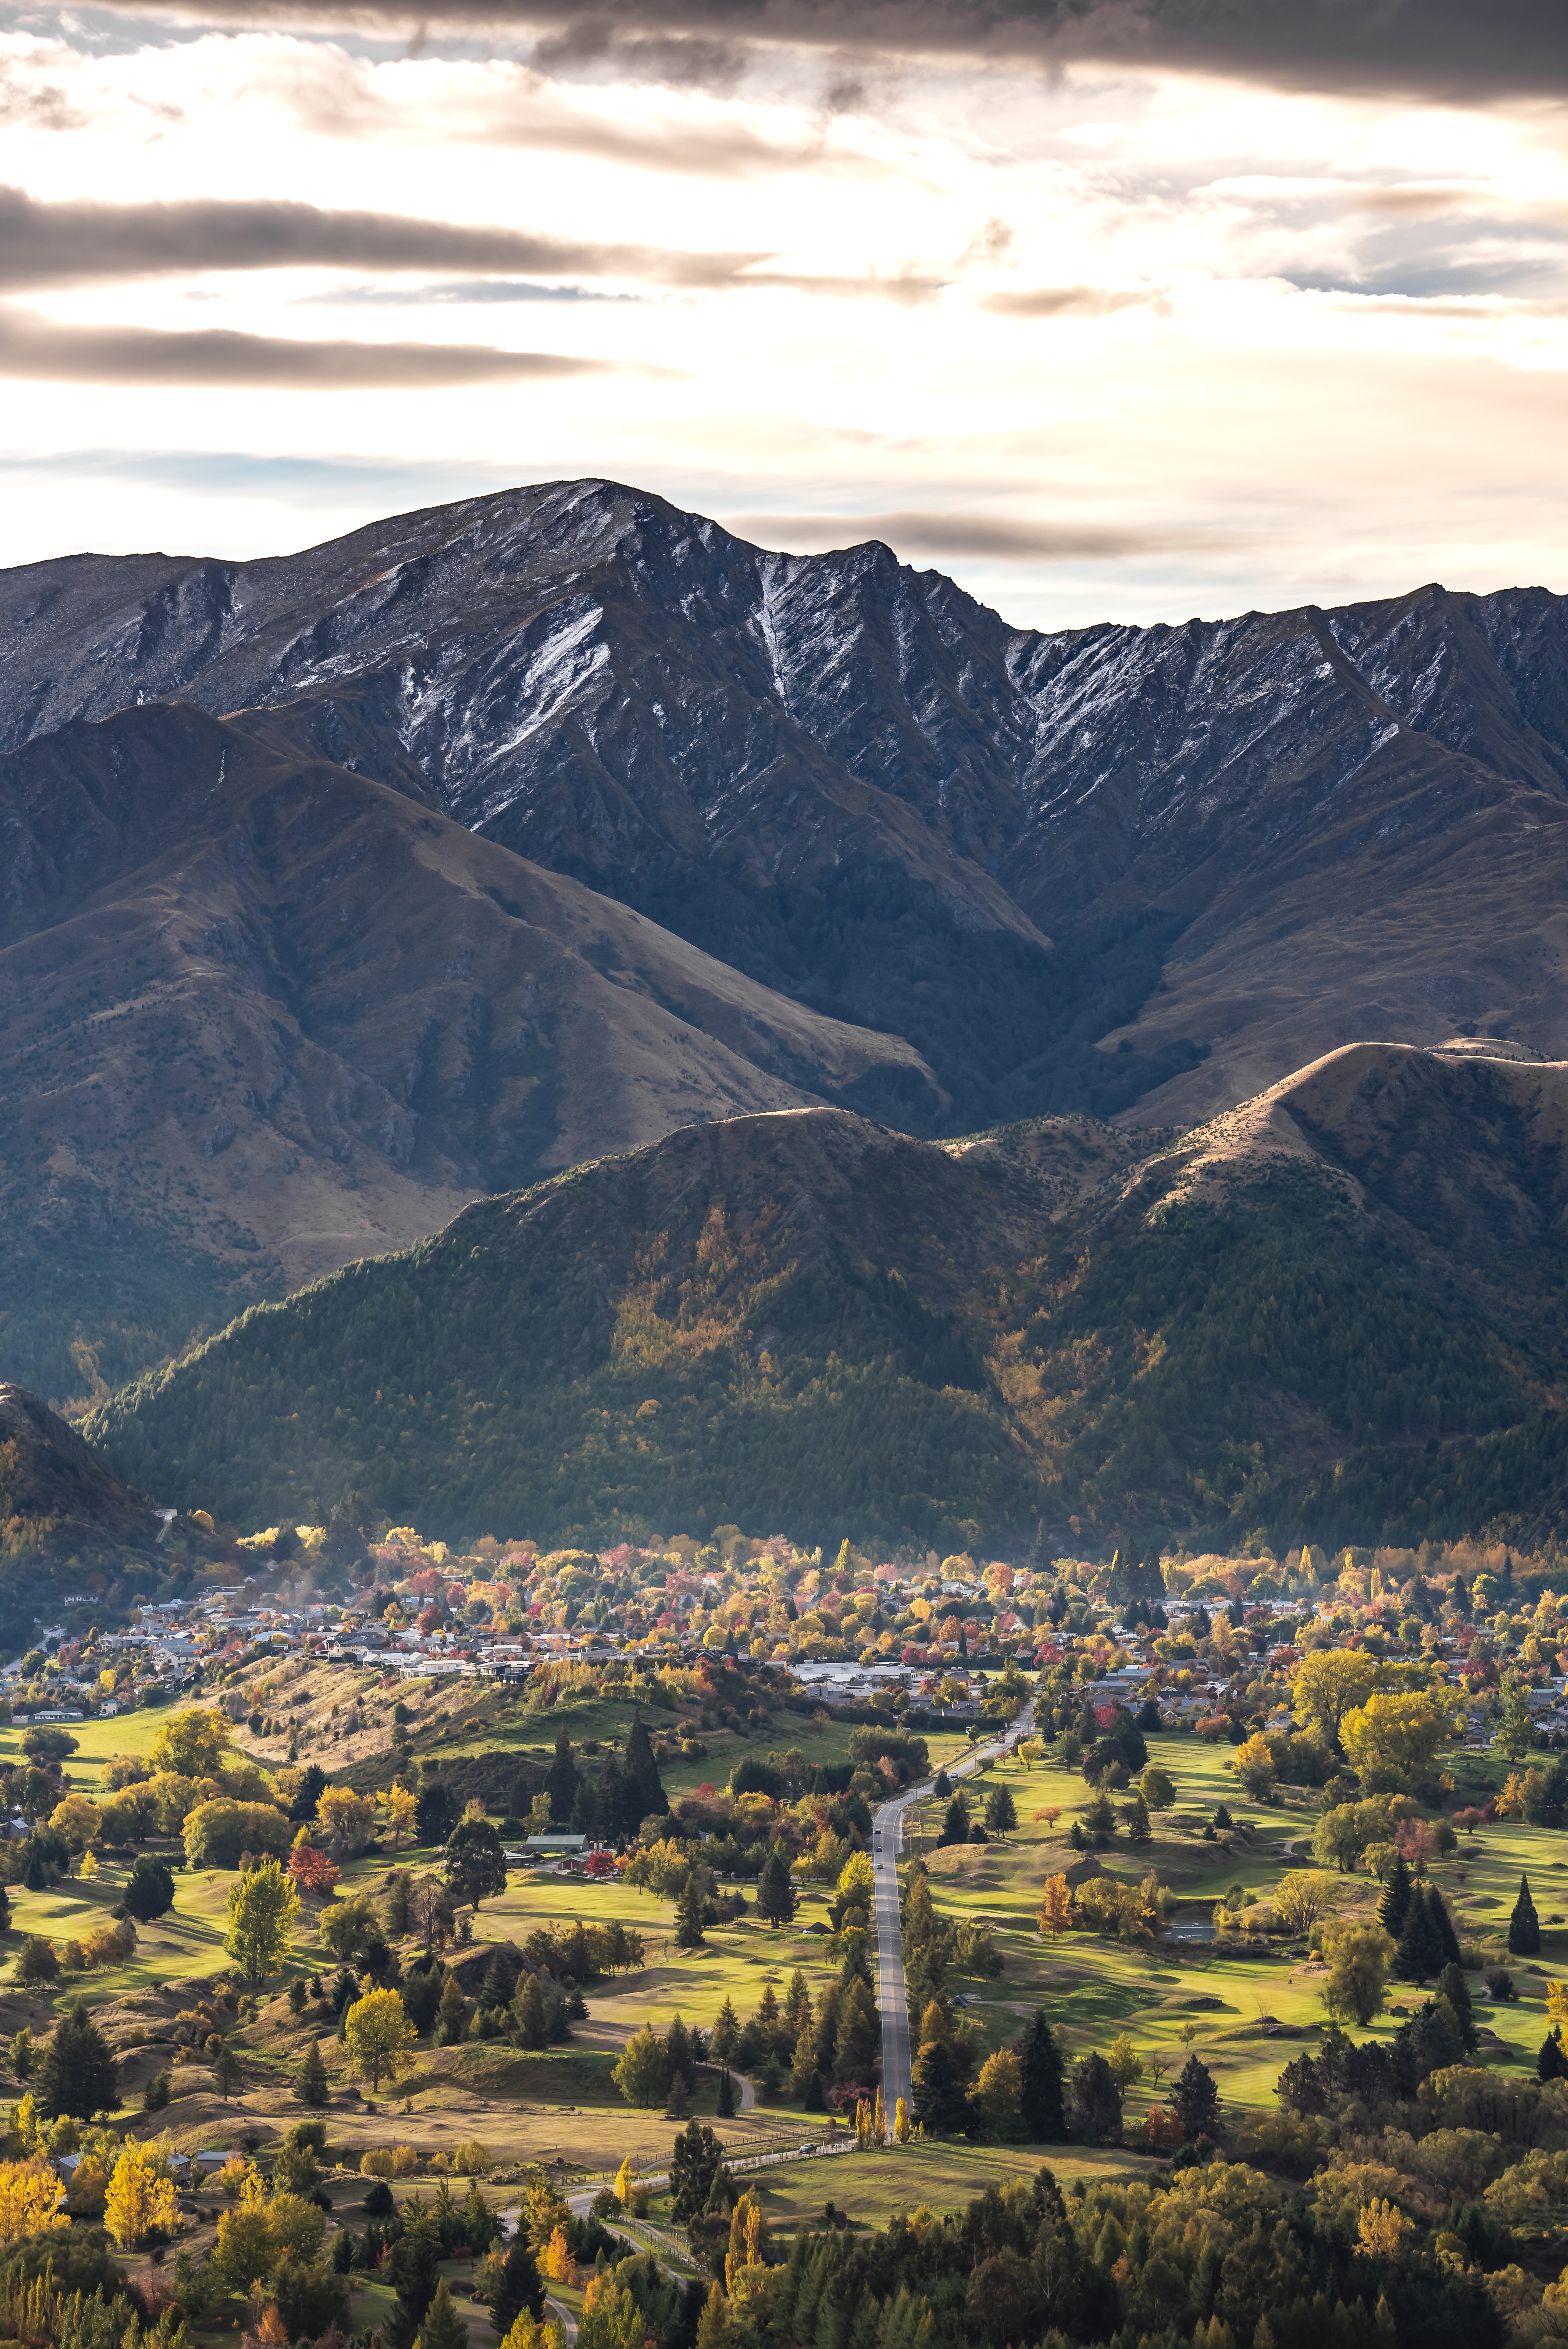 Scenic Arrowtown. Image courtesy Casey Horner and Unsplash